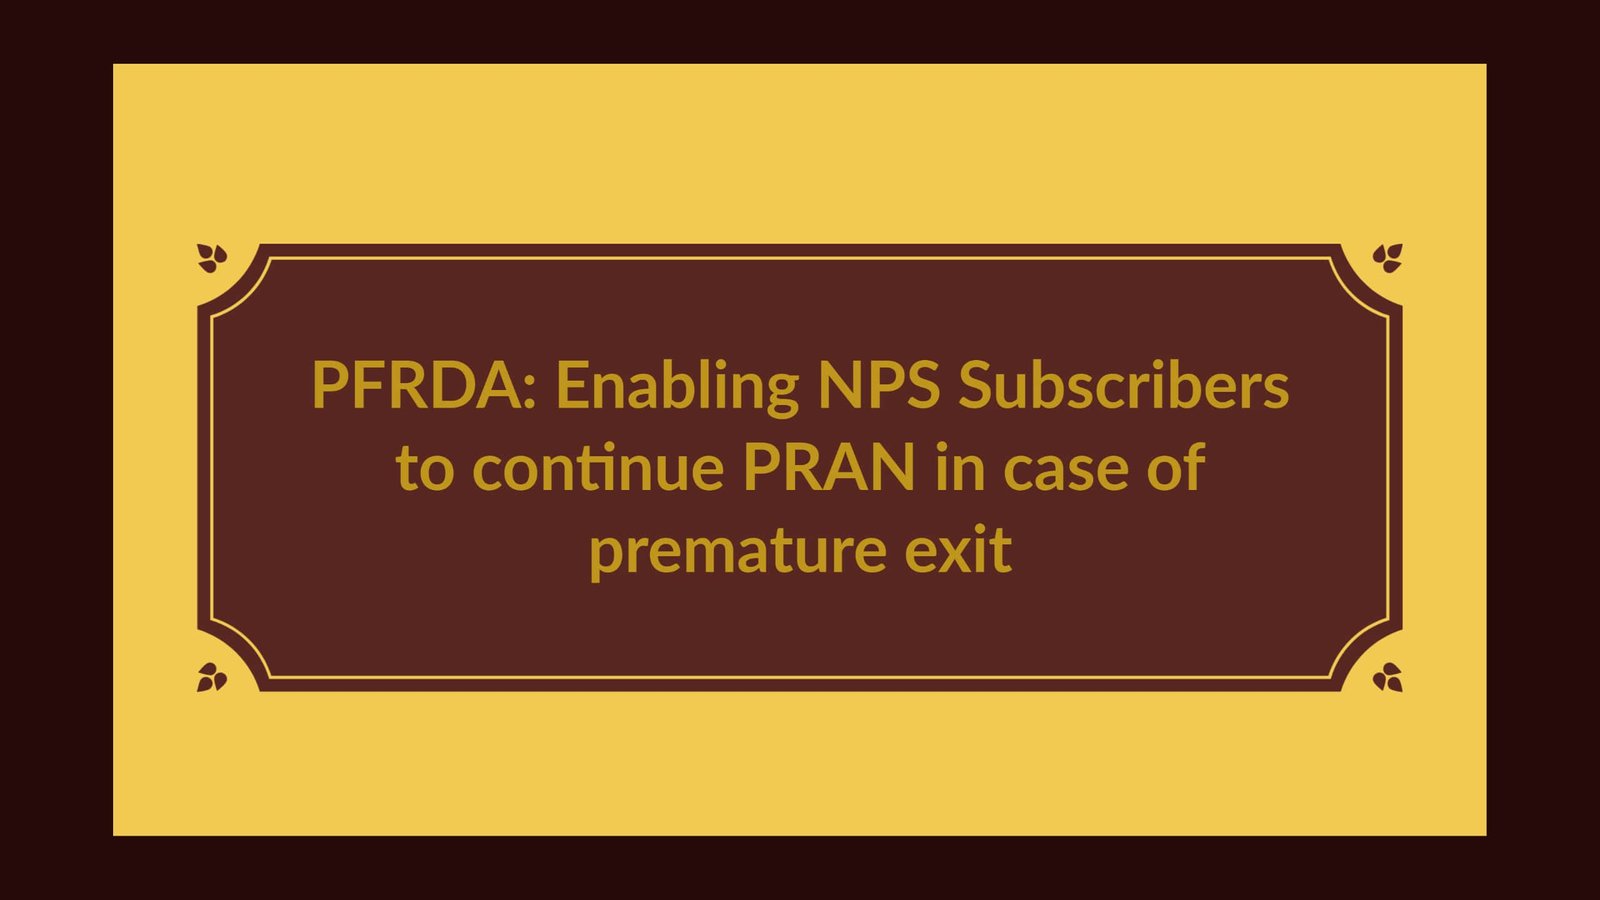 PFRDA- Enabling NPS Subscribers to continue PRAN in case of premature exit